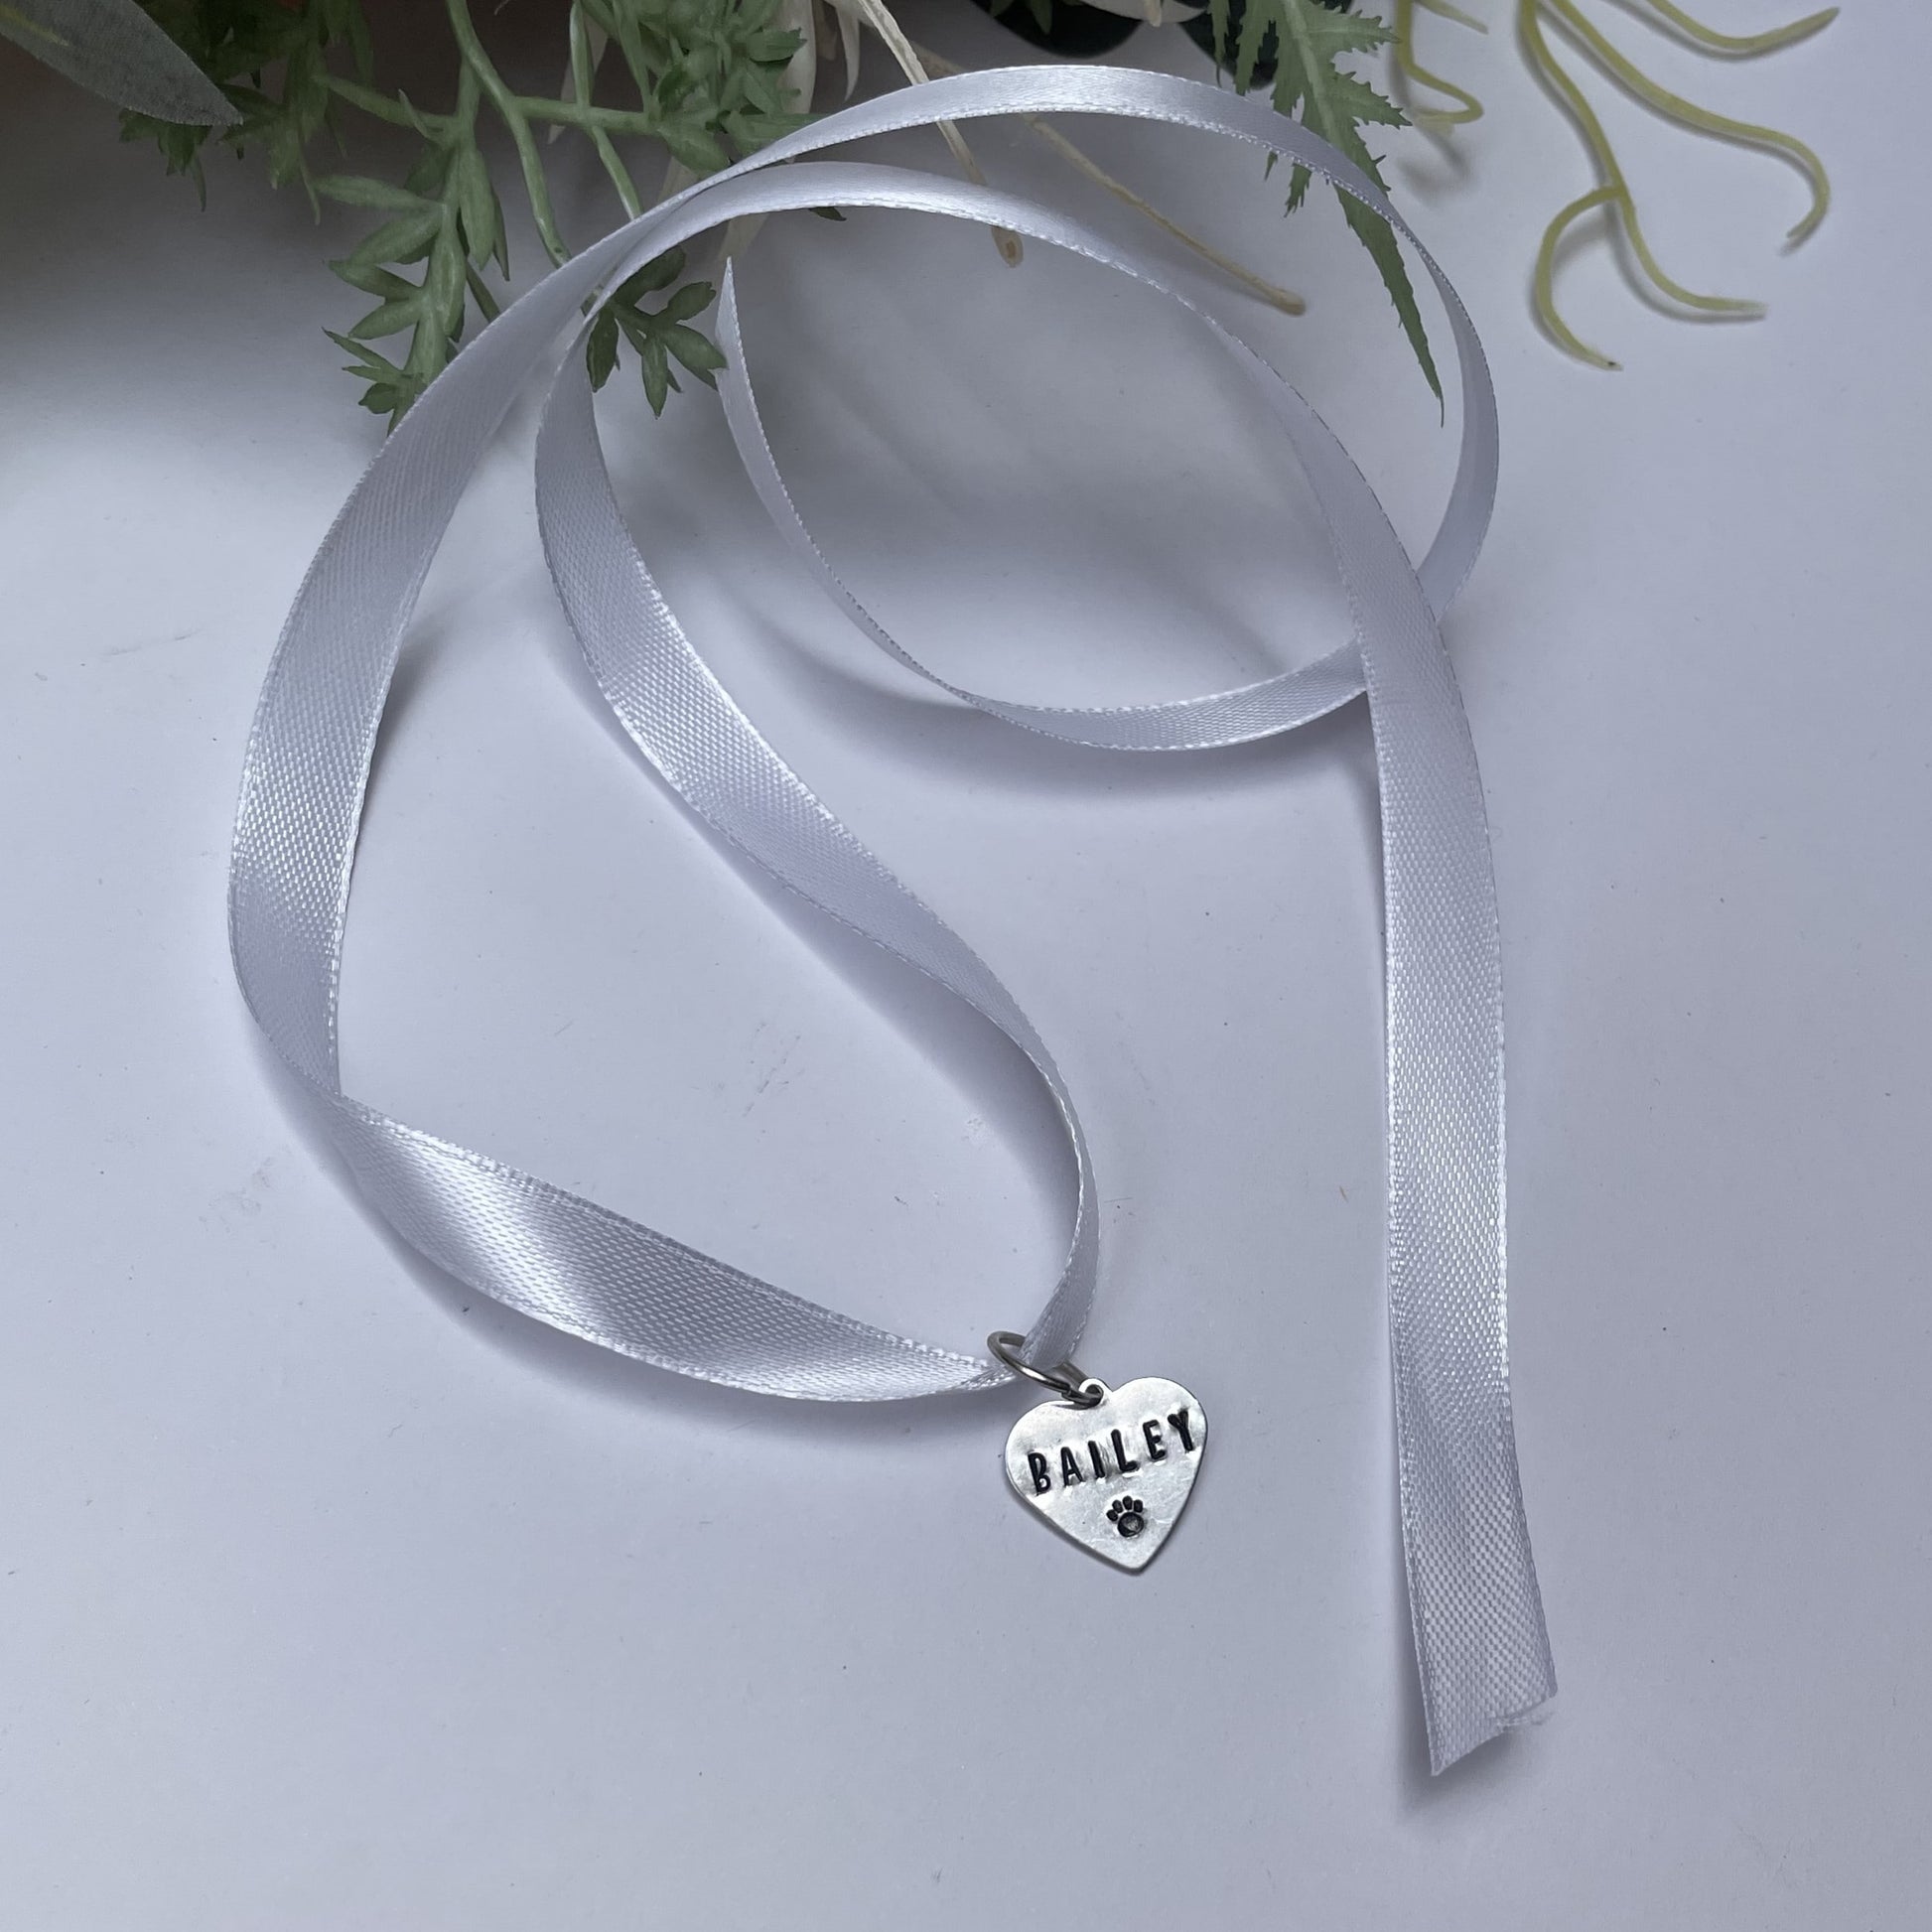 Metal hand-stamped bouquet pendant charm hanging on white ribbon, displaying the name Bailey.